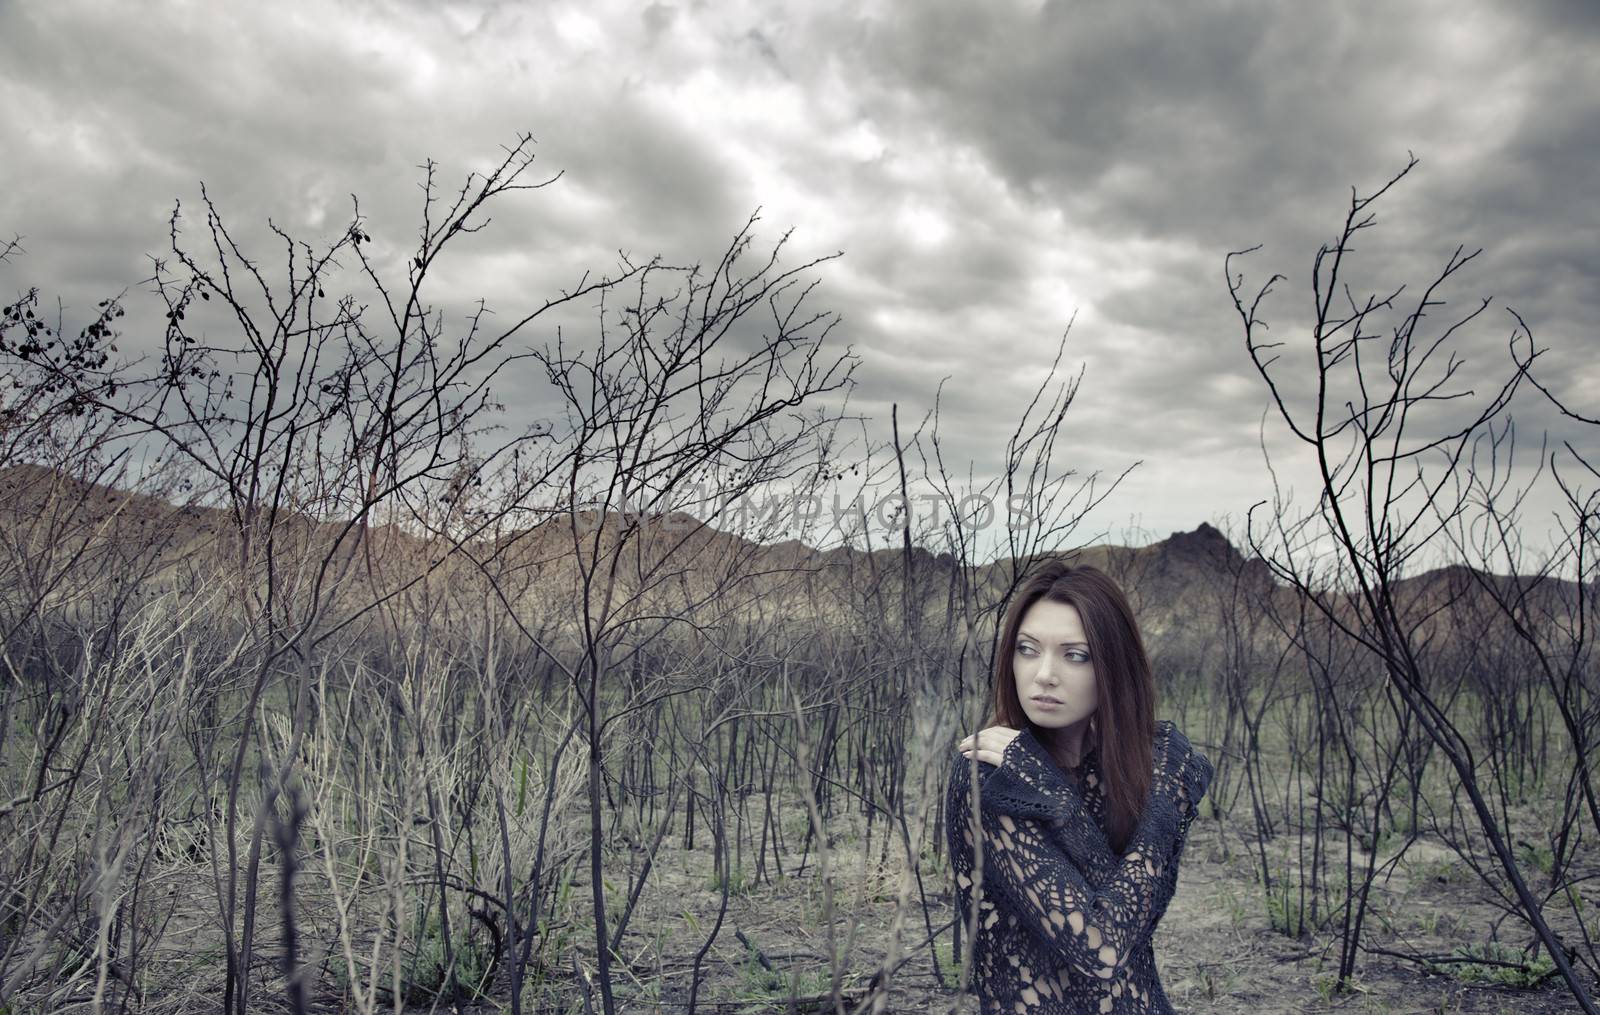 Sad alone woman in the dead bushes and thunderous sky on a background. Artistic colors added for movie effect